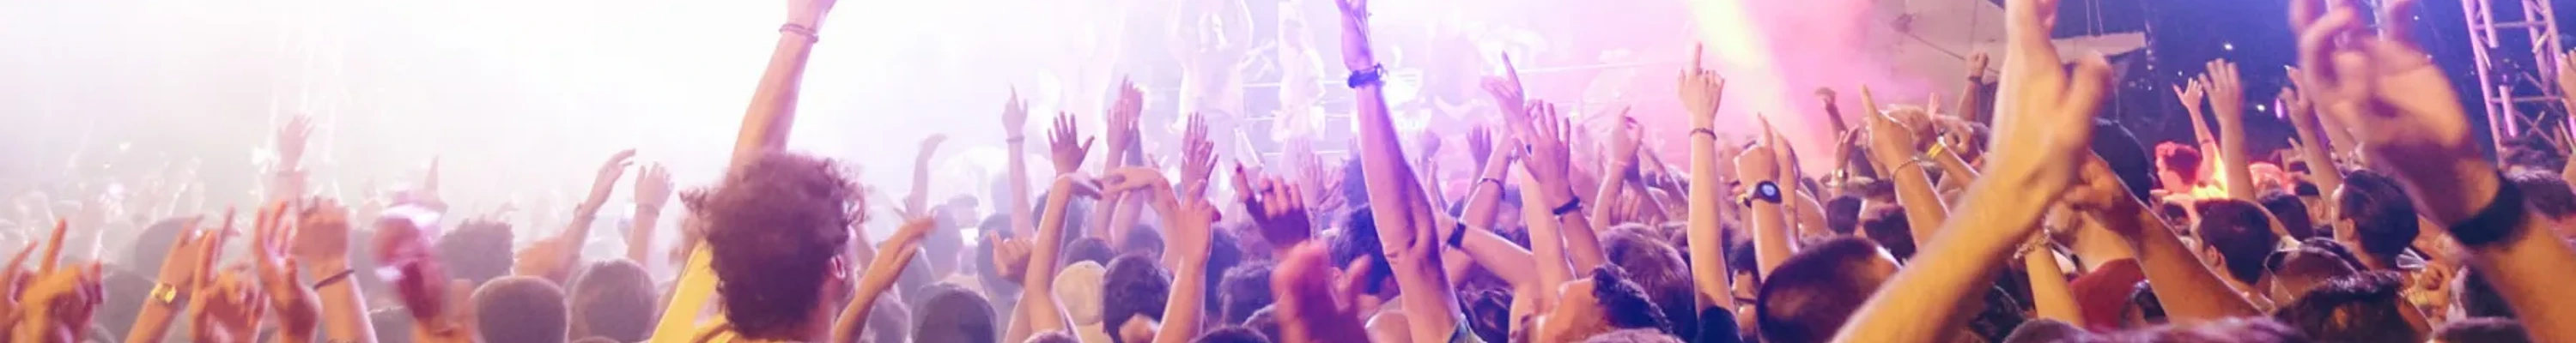 People in a crowd at a gig